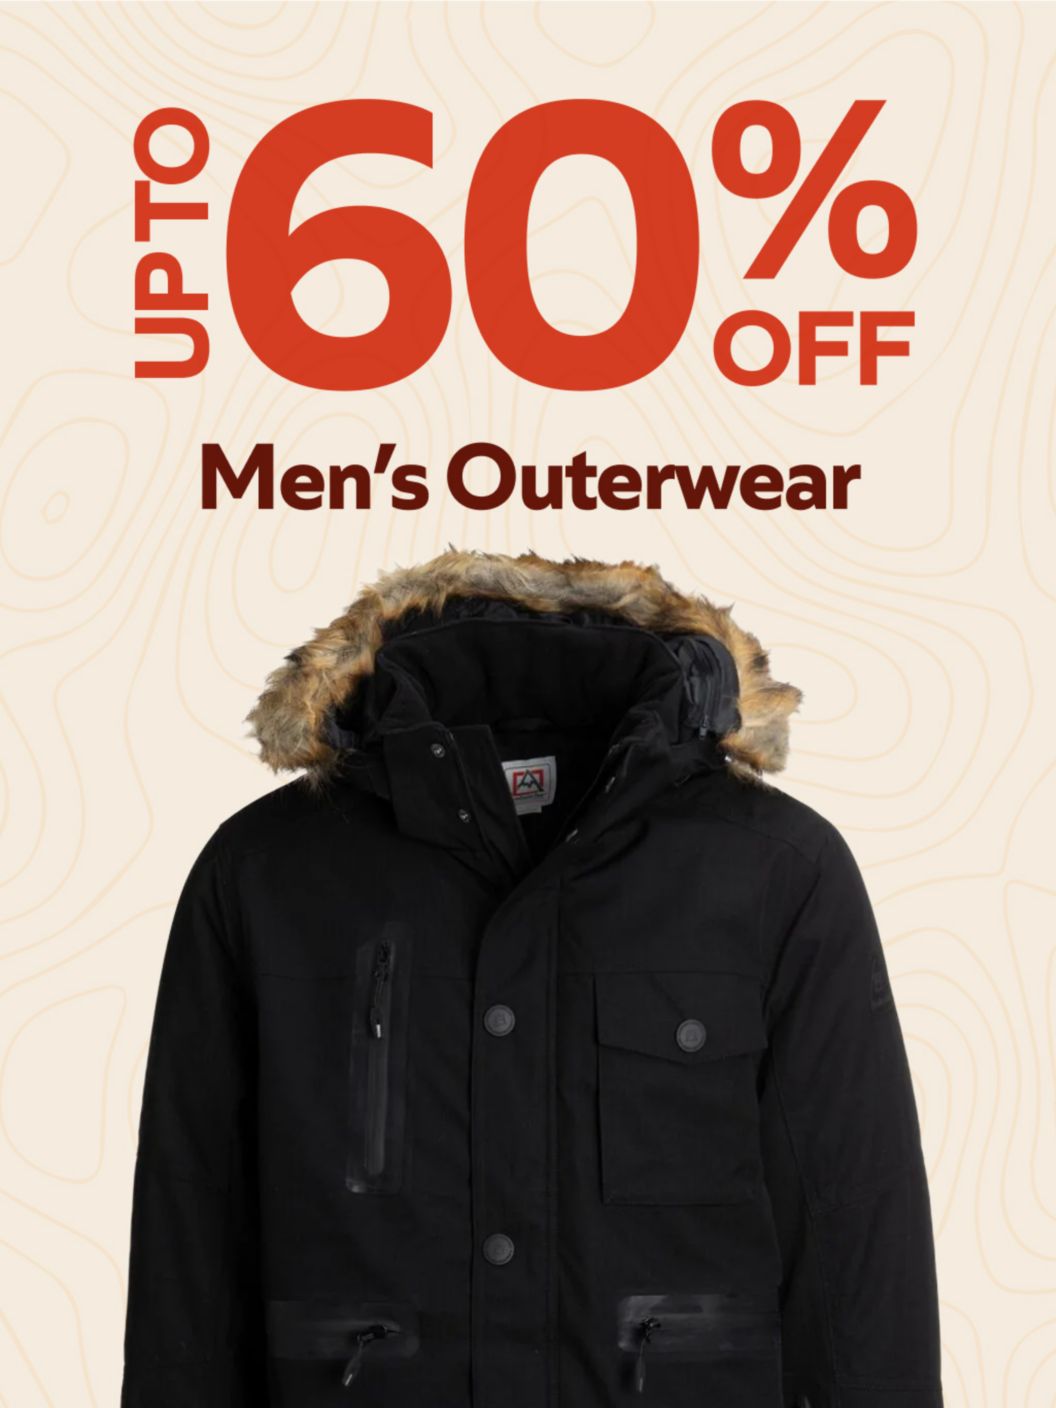 Men’s outerwear up to 60% off. 